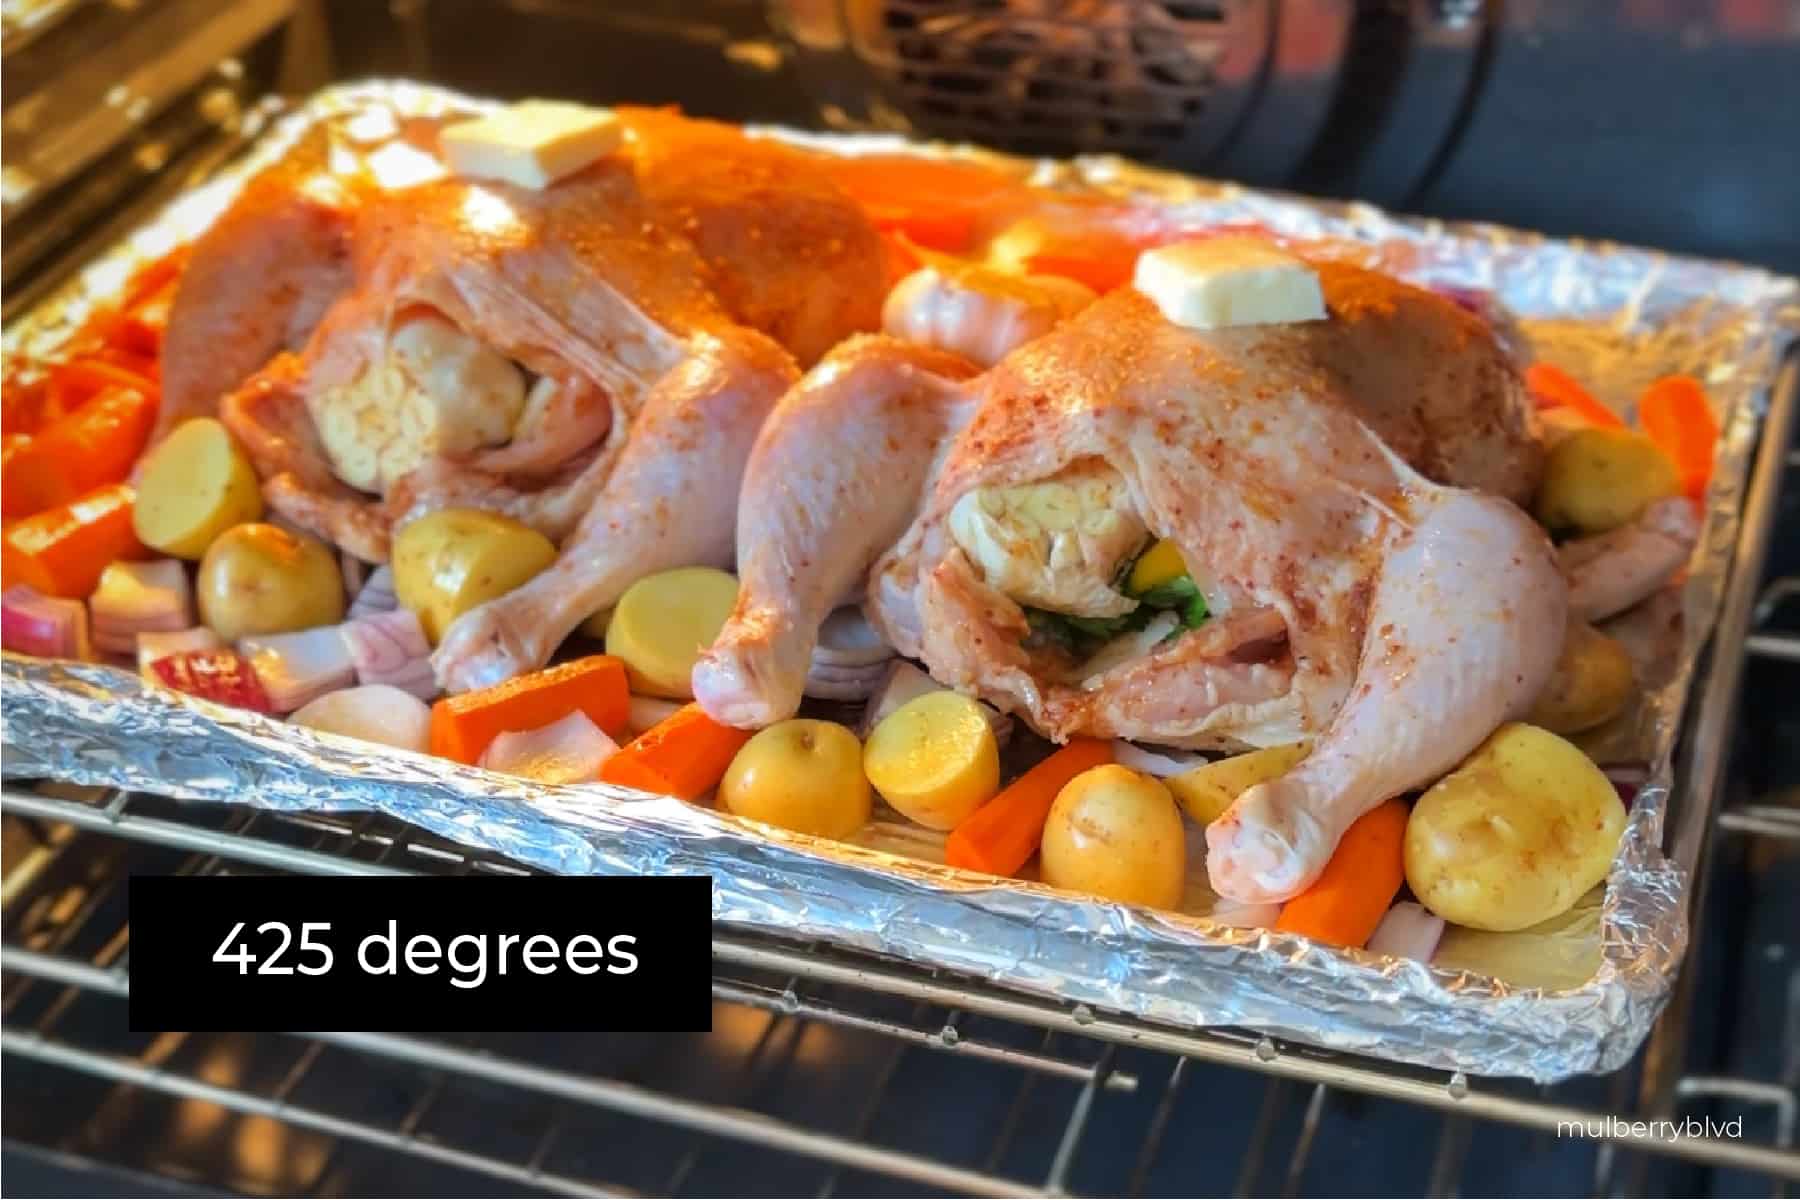 raw chicken, which is set on an aluminum foil lined baking tray, surrounded by raw potatoes, carrots, red onions, and garlic is being placed in an oven, with the text "425 degrees" written on the image